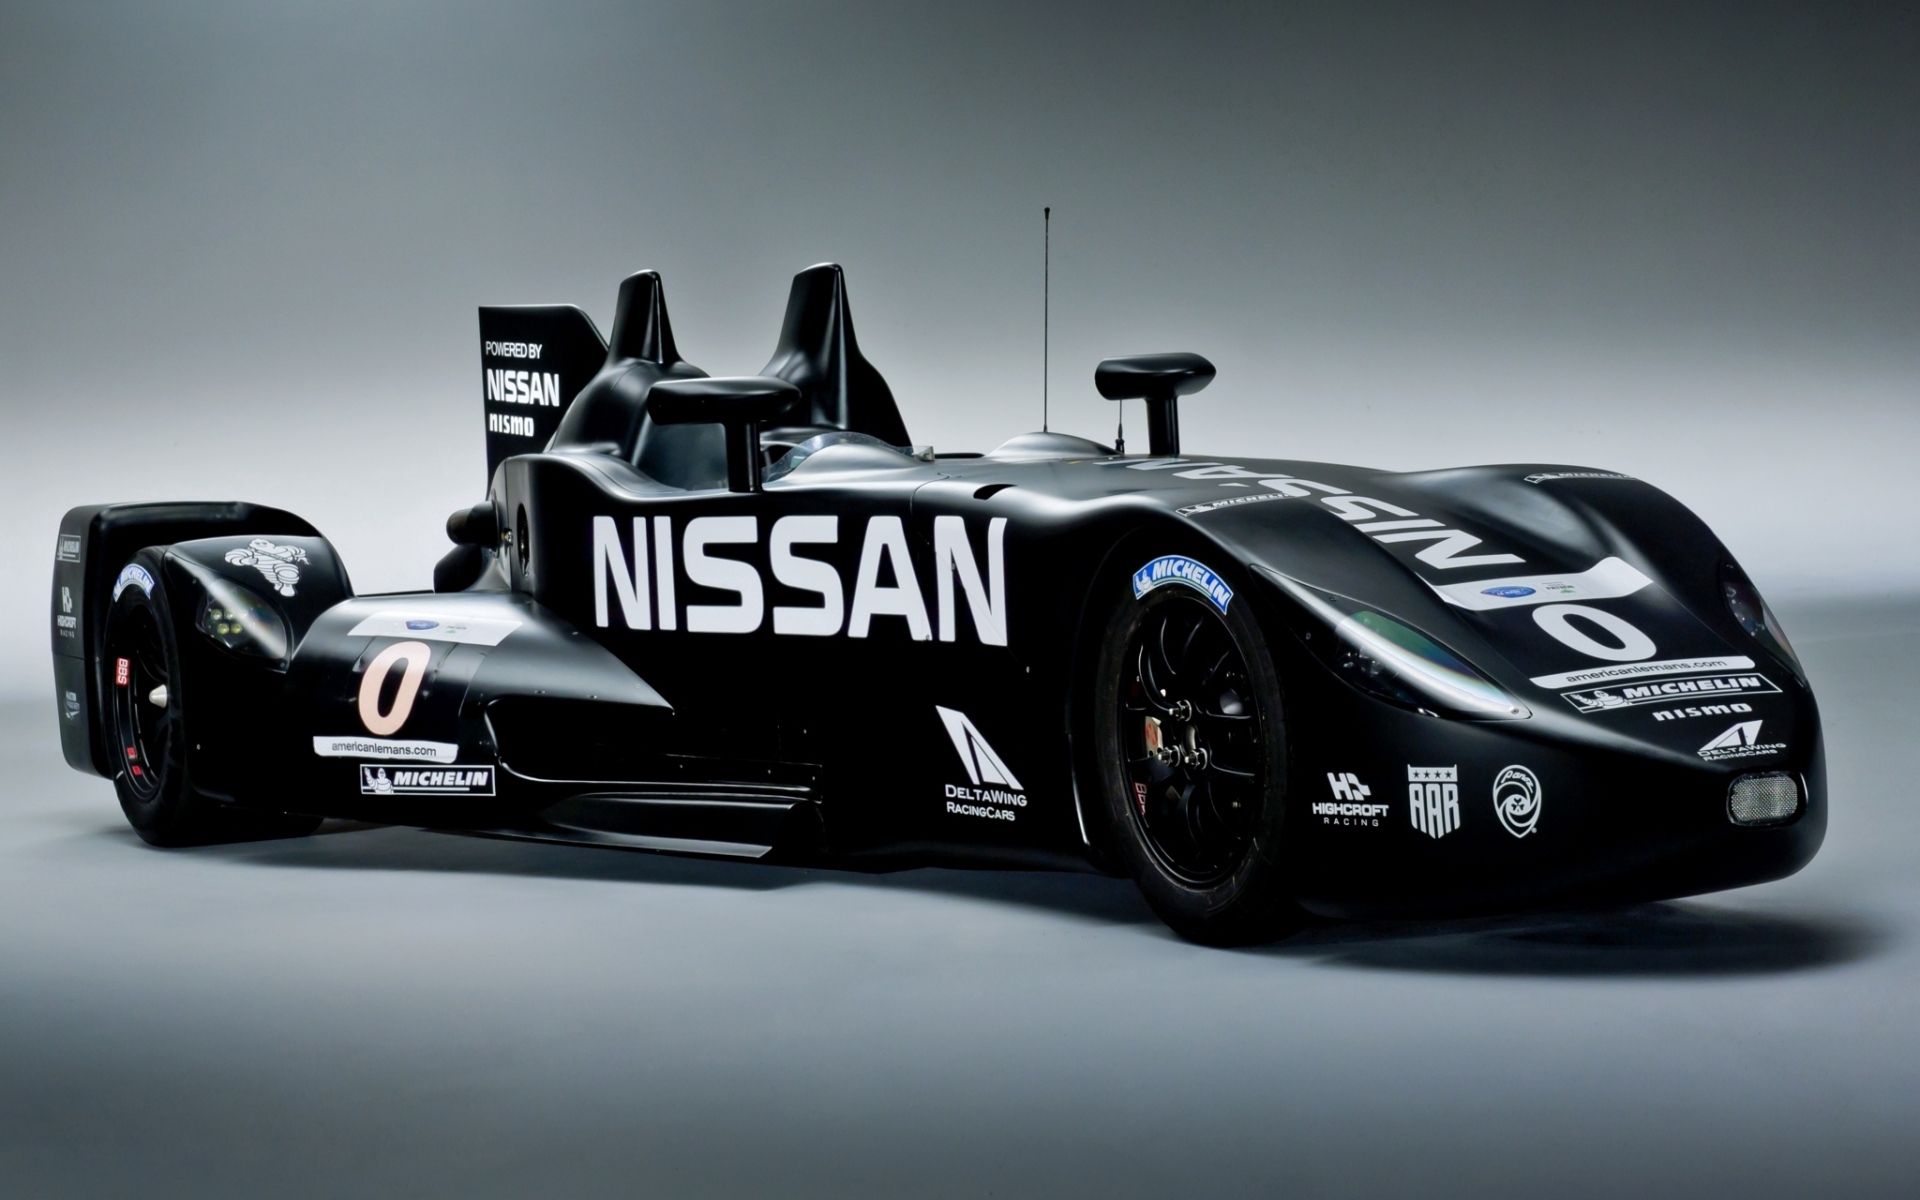 146395 download wallpaper nissan, cars, deltawing, experimental race car screensavers and pictures for free